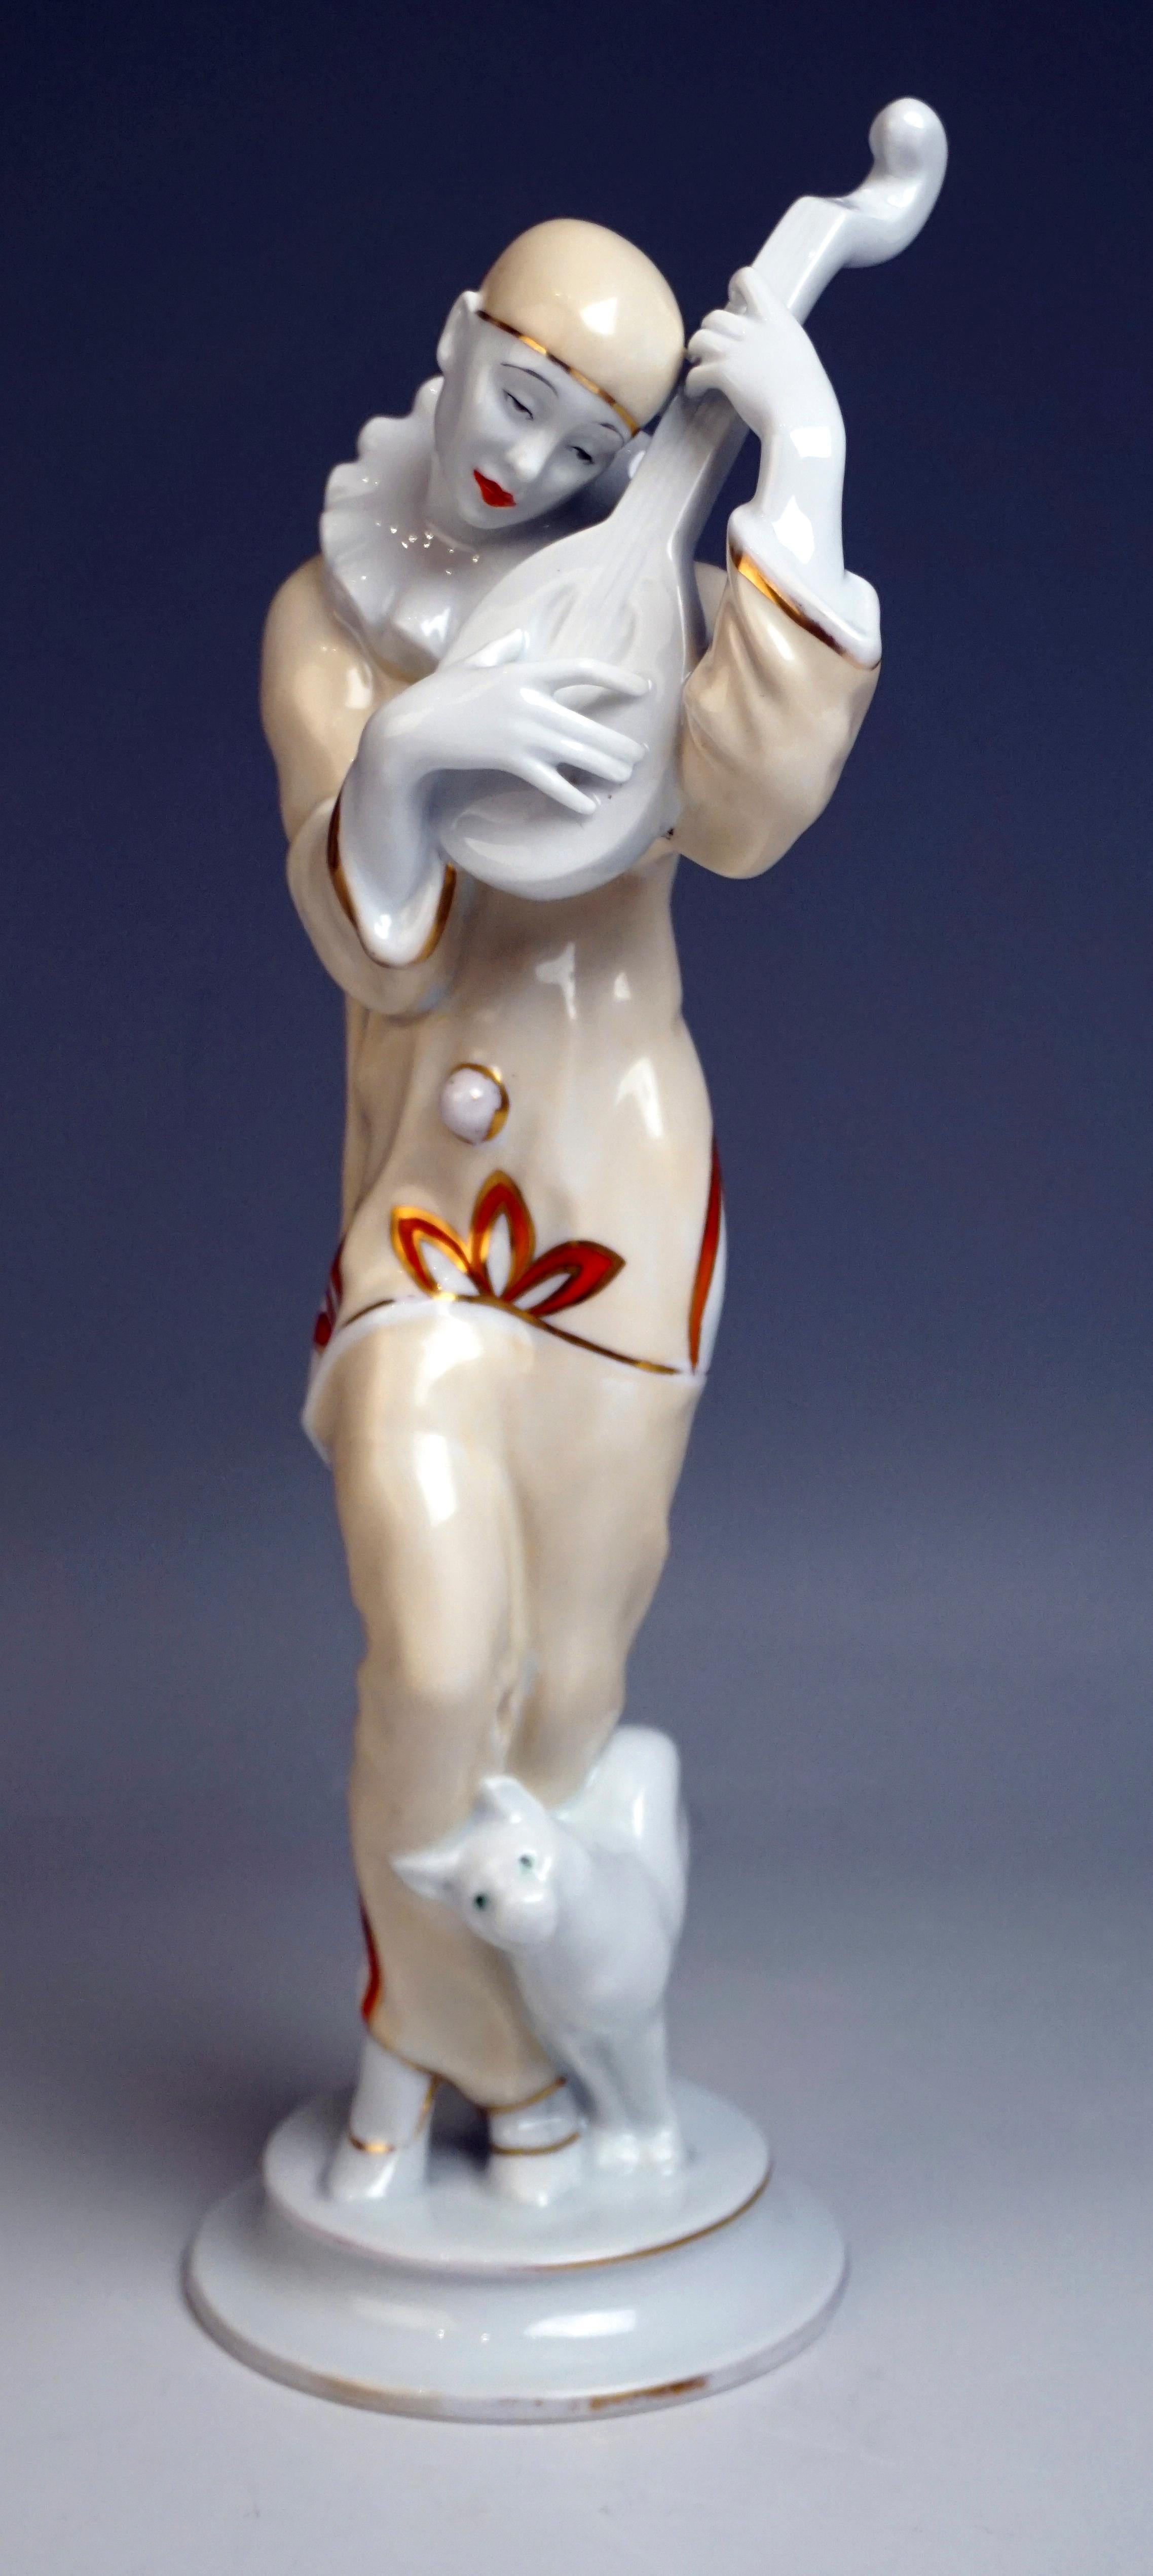 Rosenthal Art Déco Figurine Pierrot 'Ash Wednesday' Max Valentin Germany, 1922 In Good Condition For Sale In Vienna, AT